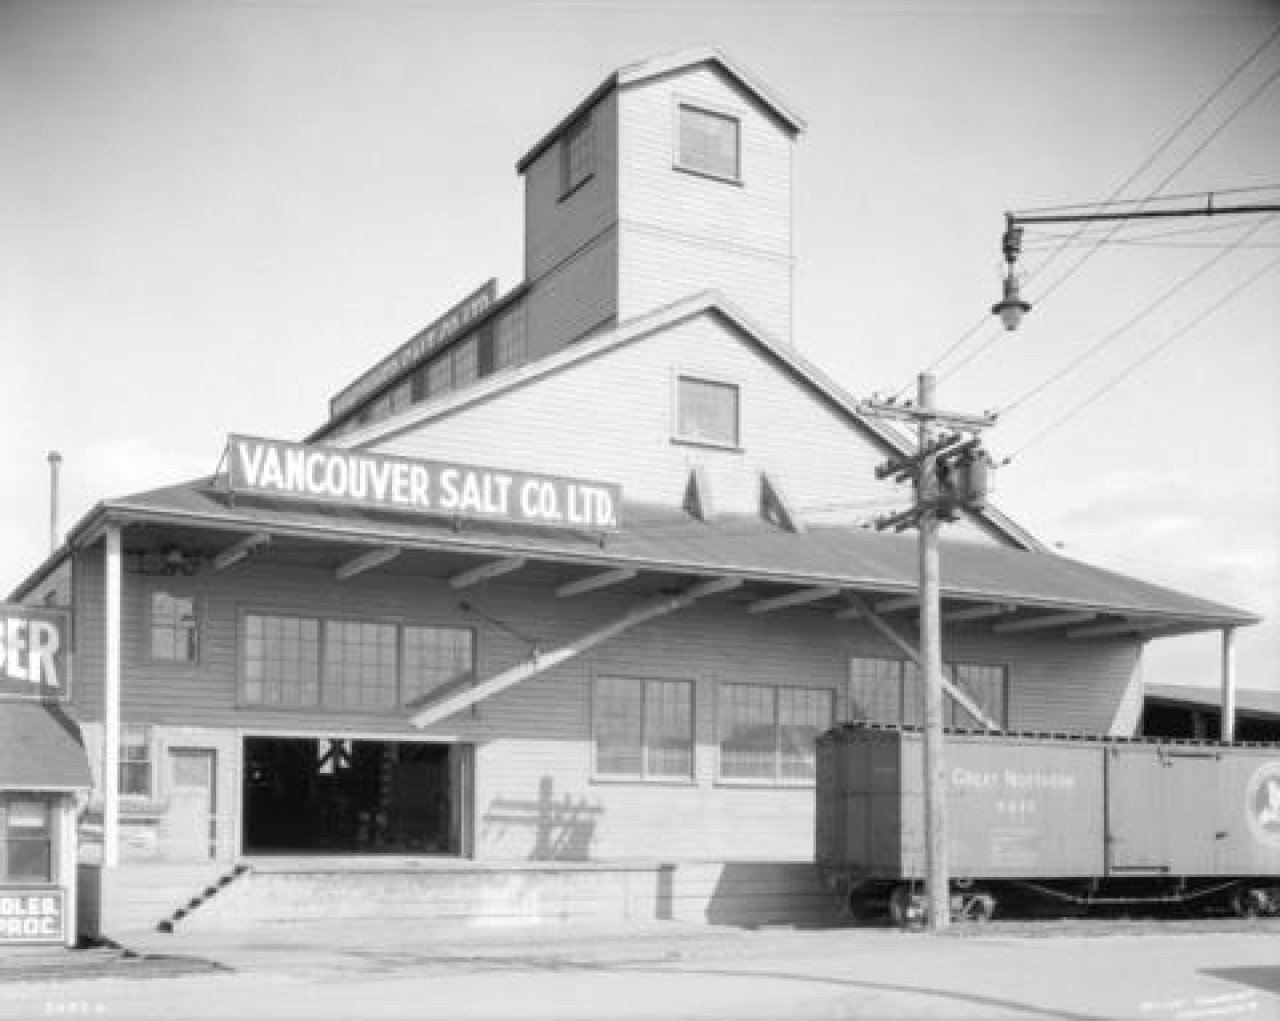 Front of Vancouver Salt Company at 85 West 1st Avenue, c. 1933. Photo courtesy of City of Vancouver Archives 99-4317